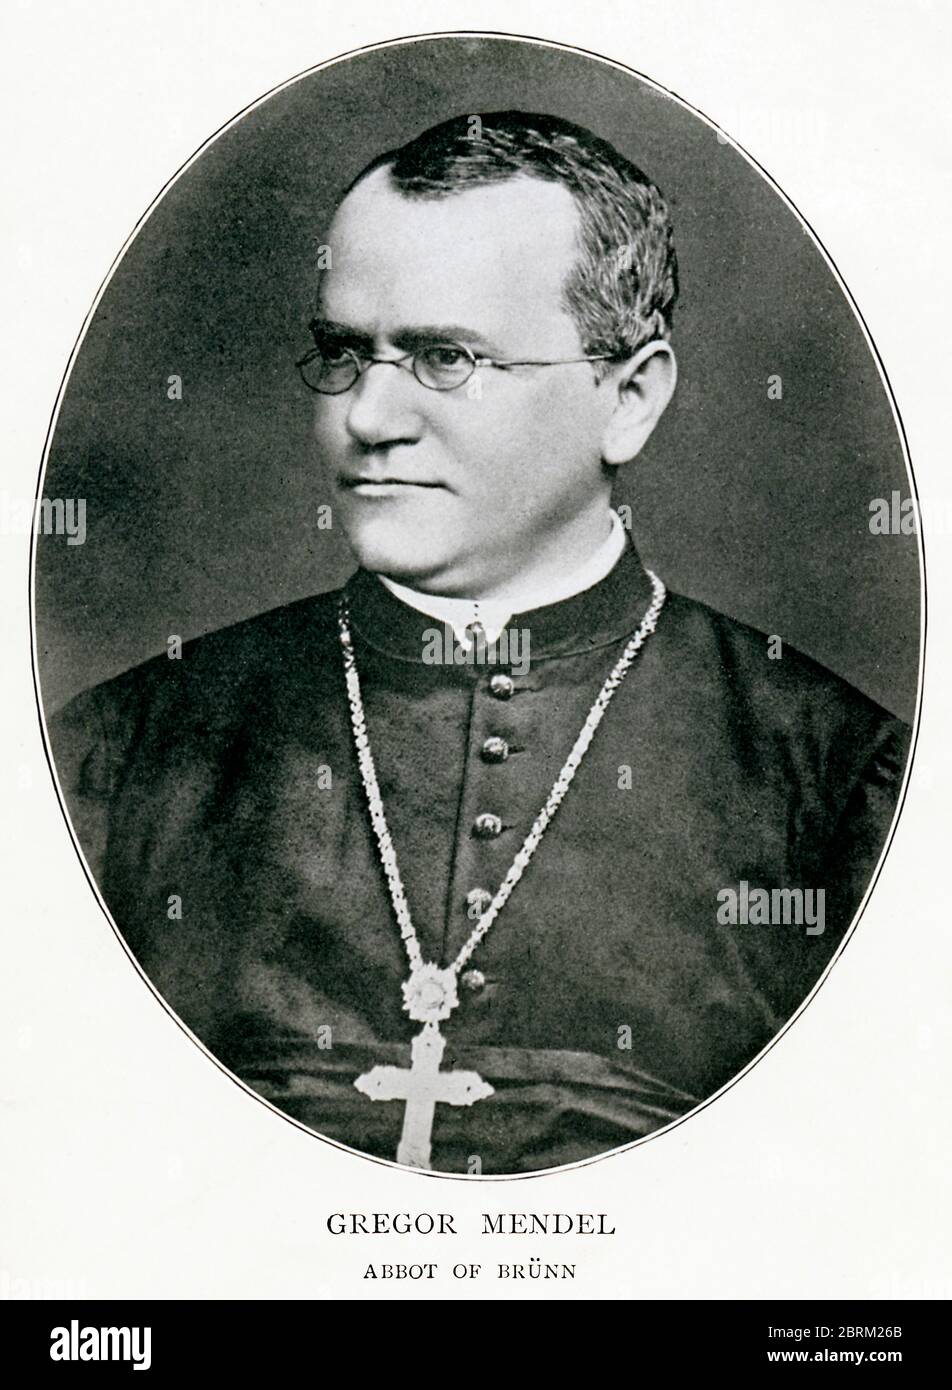 Gregor Mendel, portrait photograph of the Czech scientist  in c.1855, Augustinian friar, abbot of Brünn and founder of the modern science of genetics for his work on plants Stock Photo